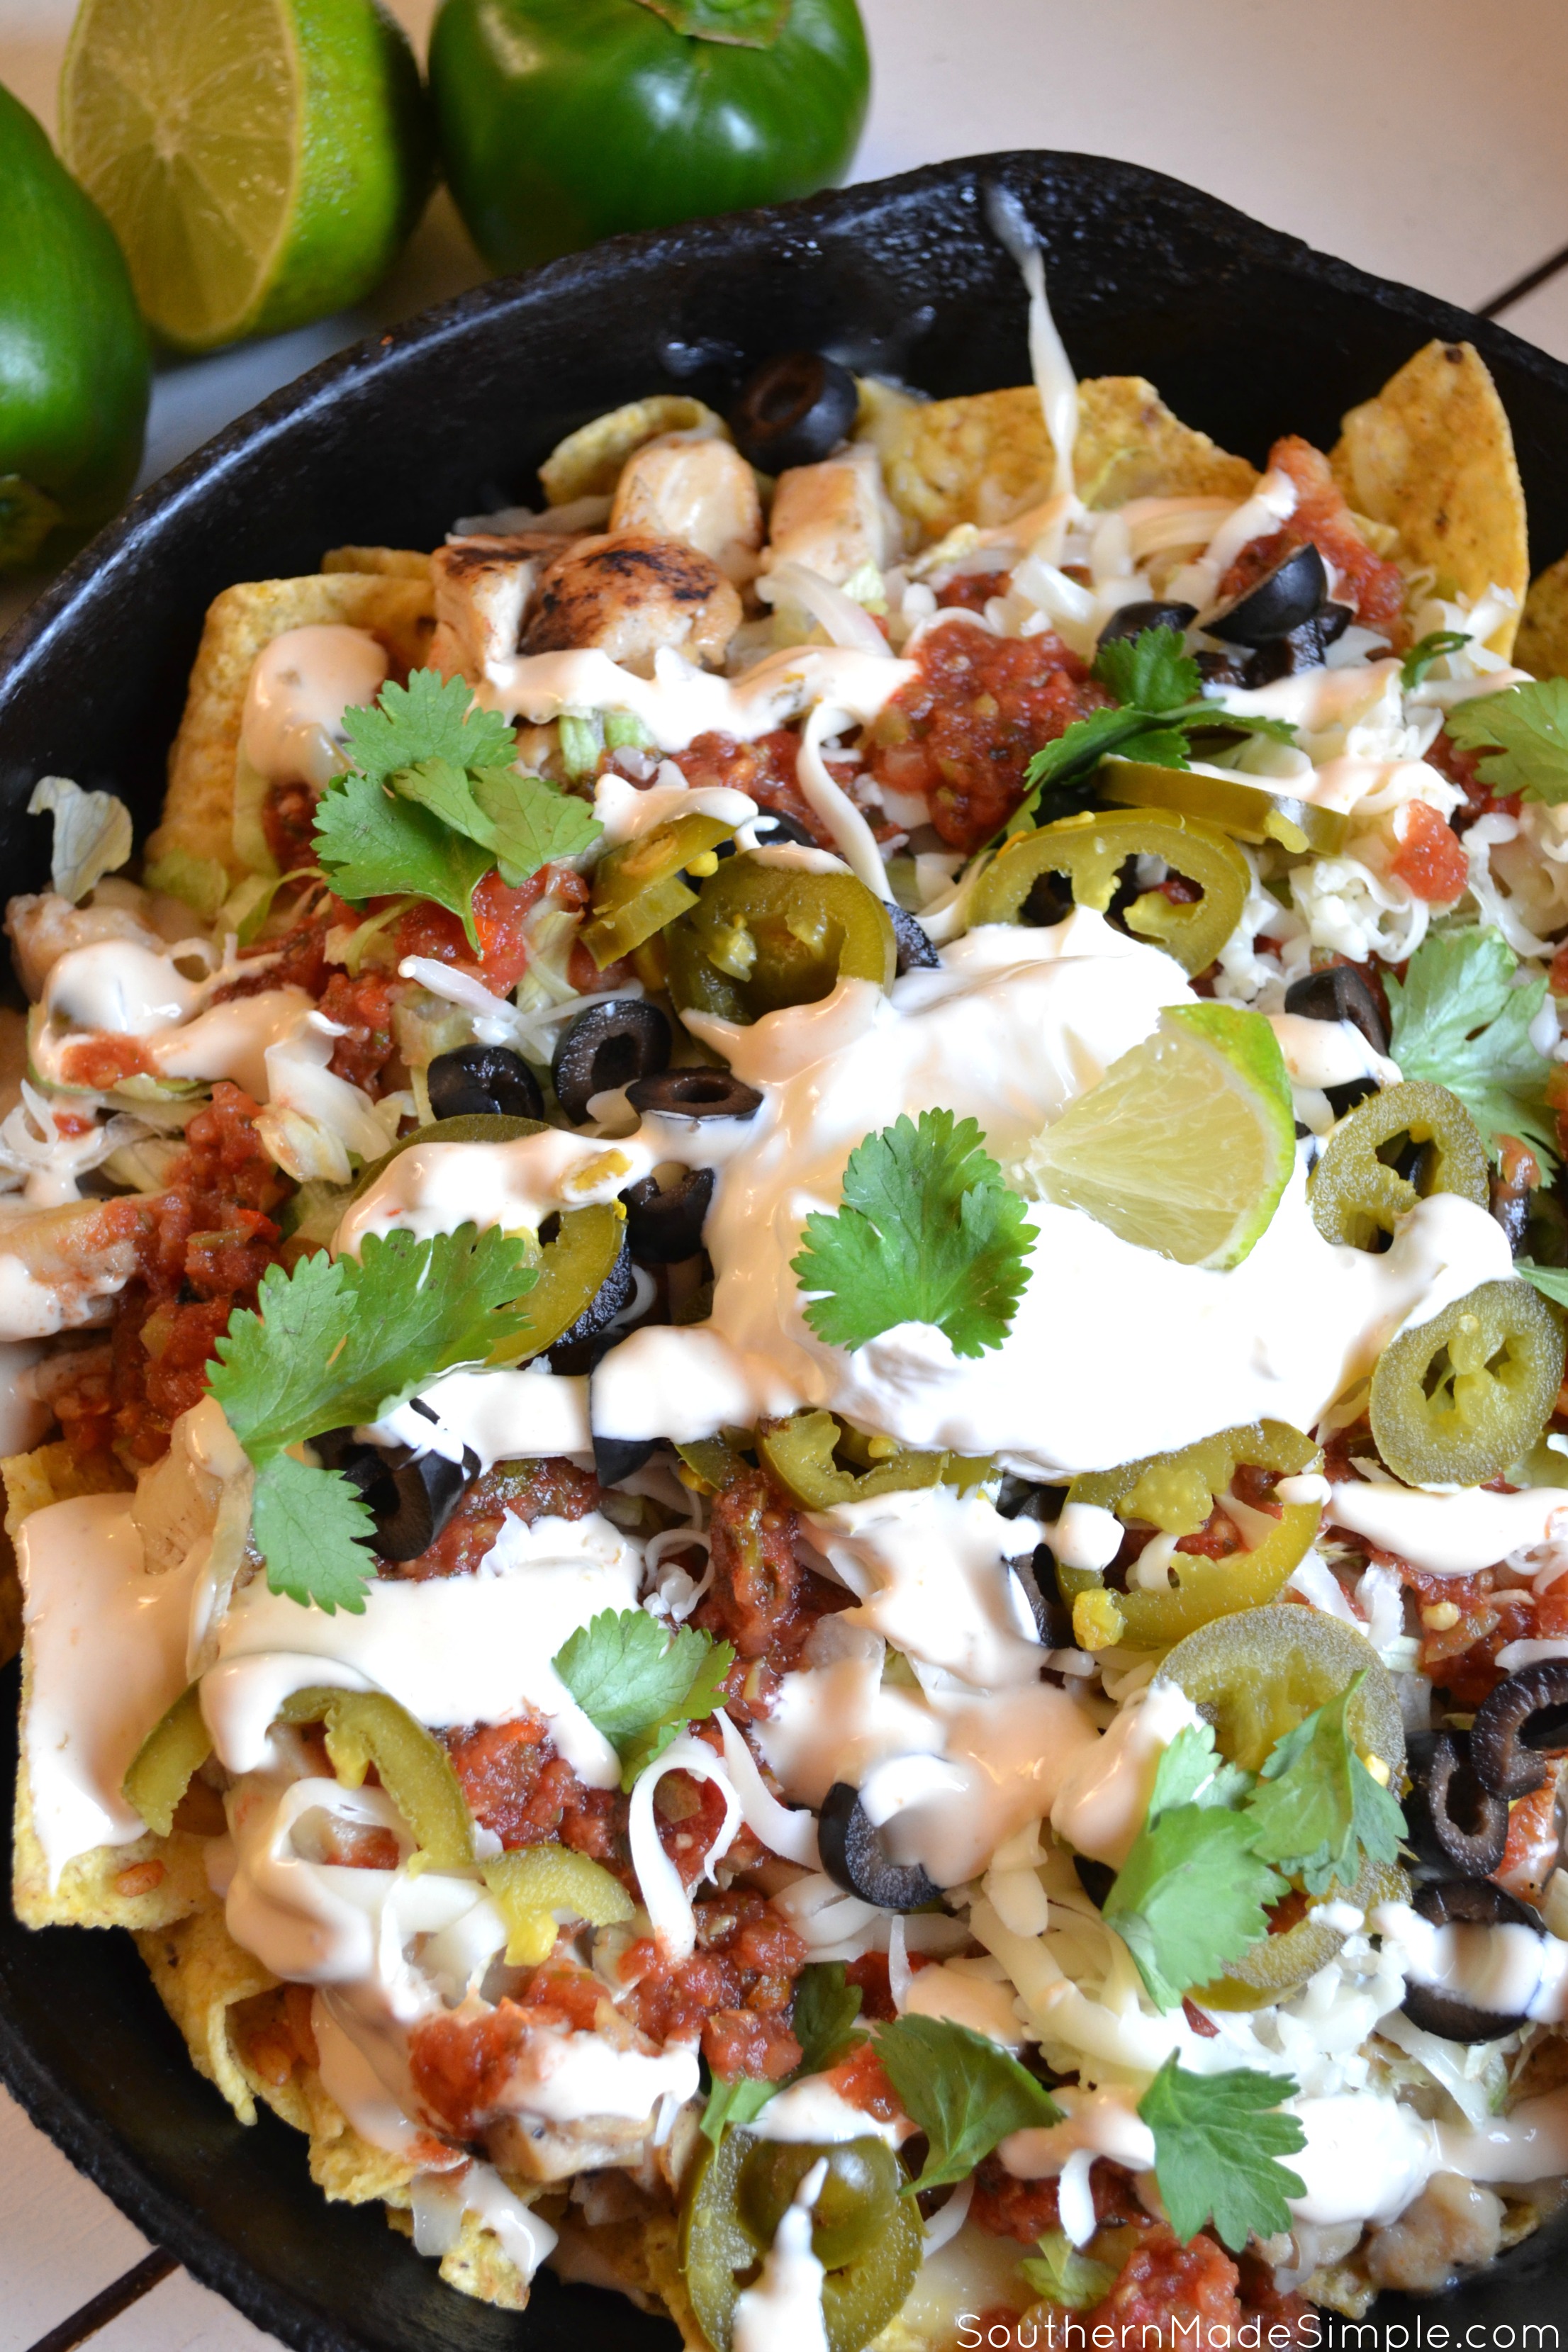 10 Minute Skillet Nachos are a perfect meal or snack on busy weekdays or even for game day! This meal is easy for kids to help prepare and can be personalized with allof your favorite nacho toppings! #BensBeginners #UncleBensPromo #as @UncleBens